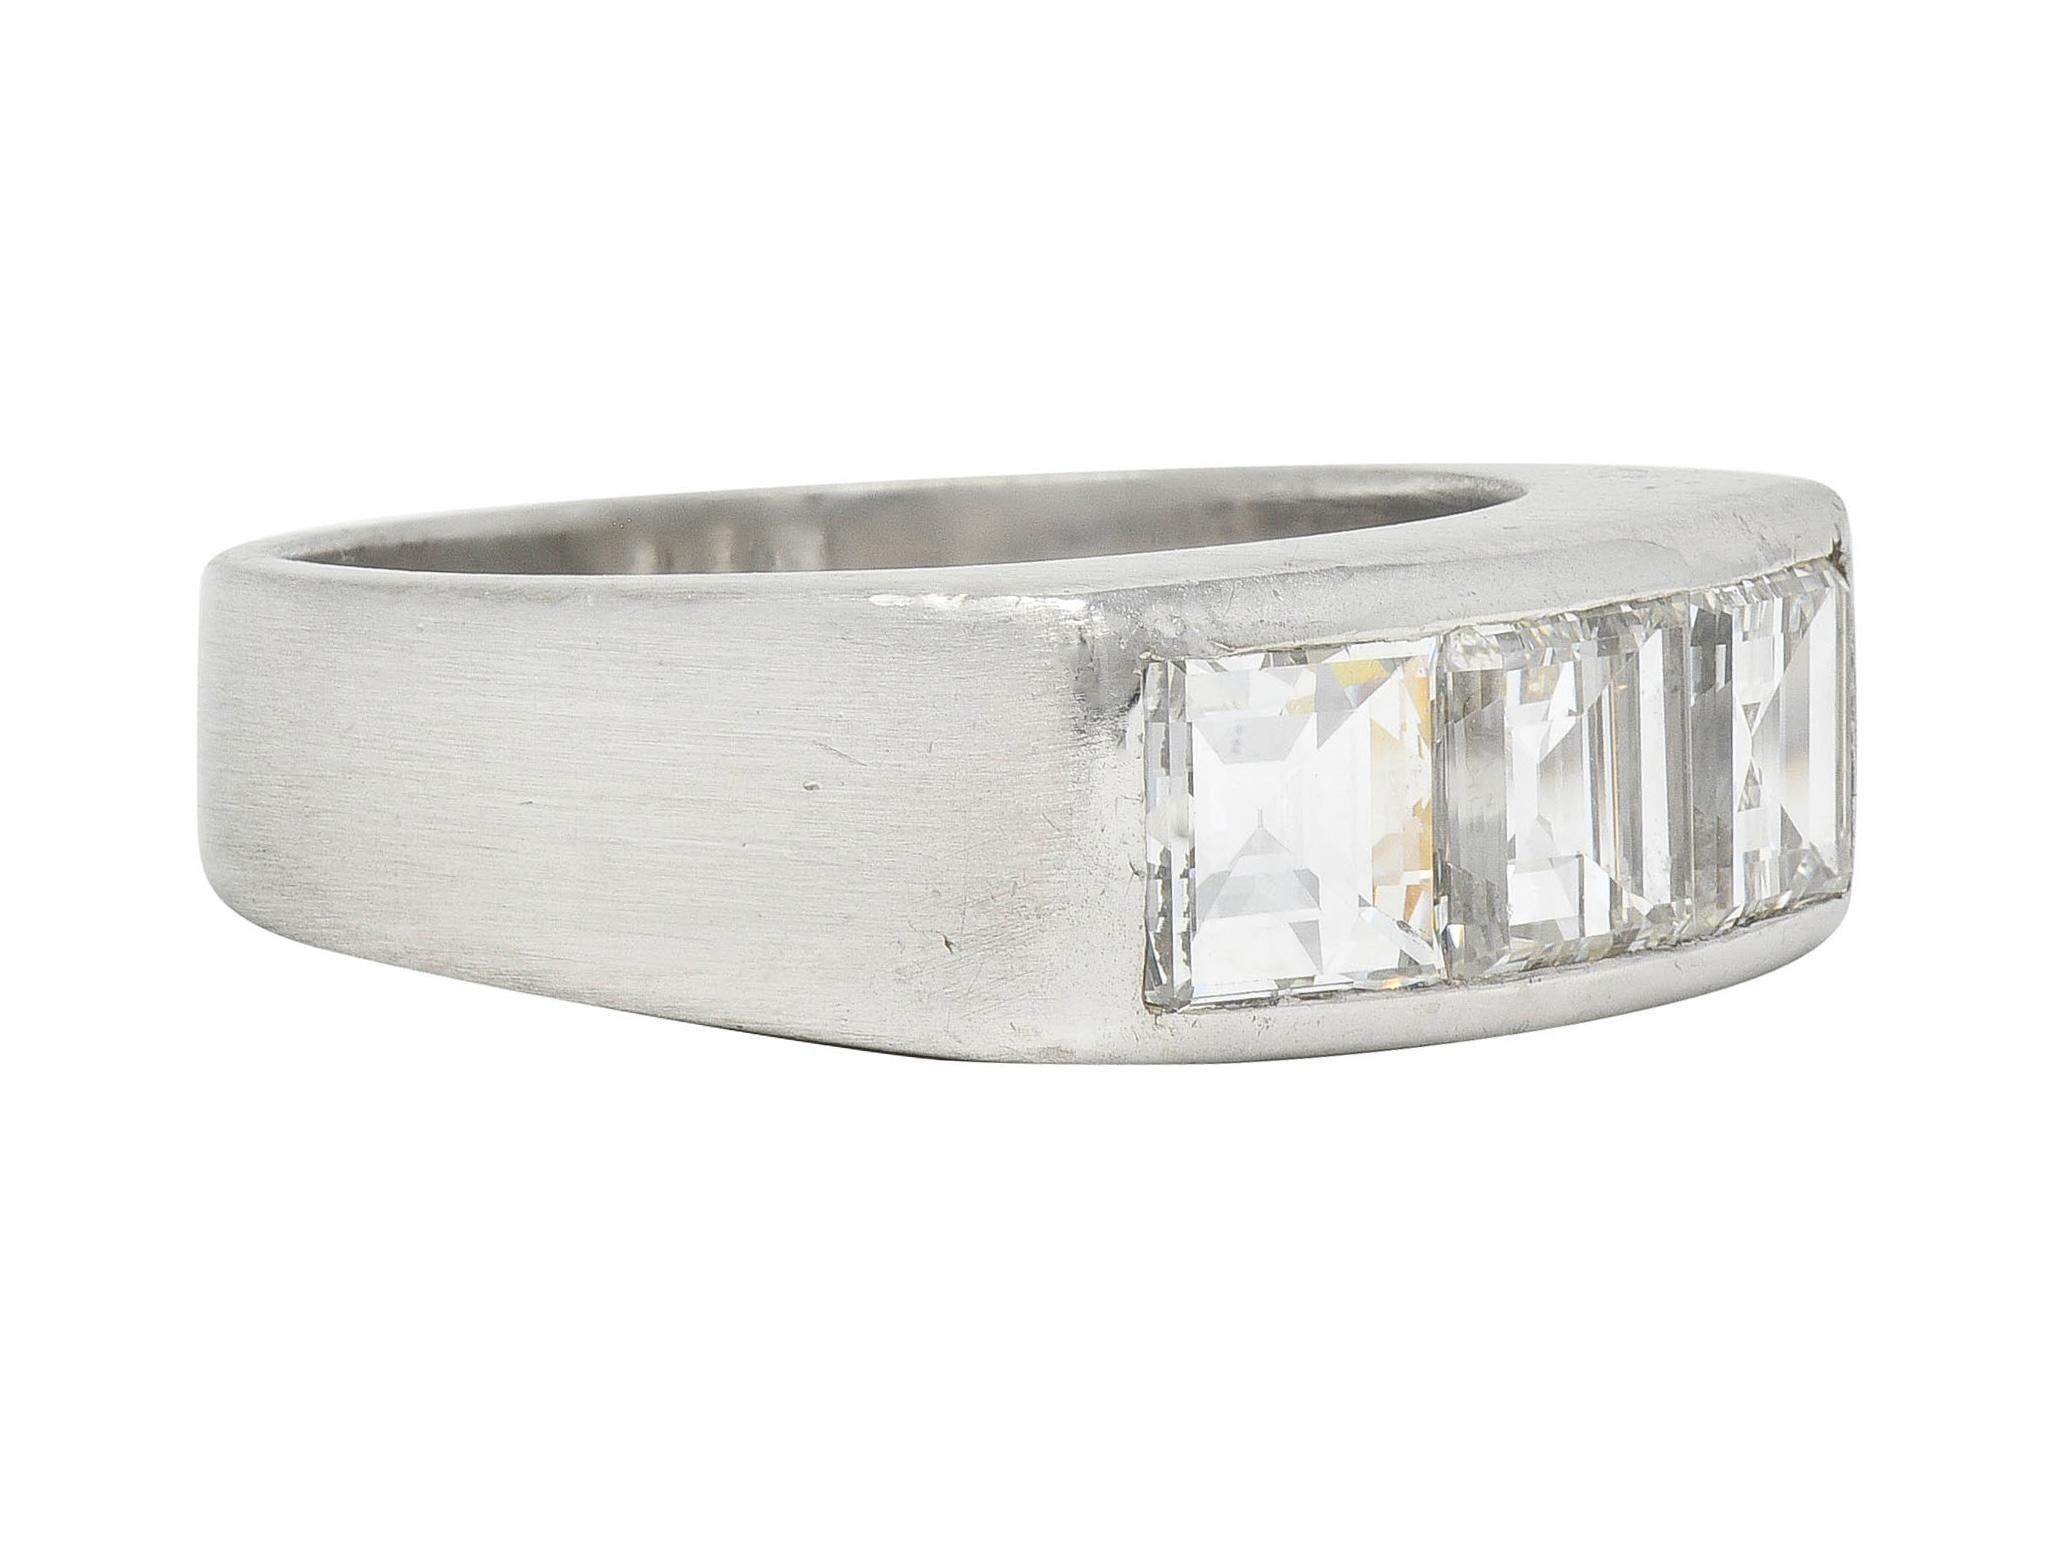 Centering three square step cut diamonds set east to west in channel
Weighing approximately 2.82 carats total - F/G color with VS2 clarity
Flanked by sloping shoulders 
With matte finish 
Tested with partial stamps for platinum
Circa: 1950s
Ring